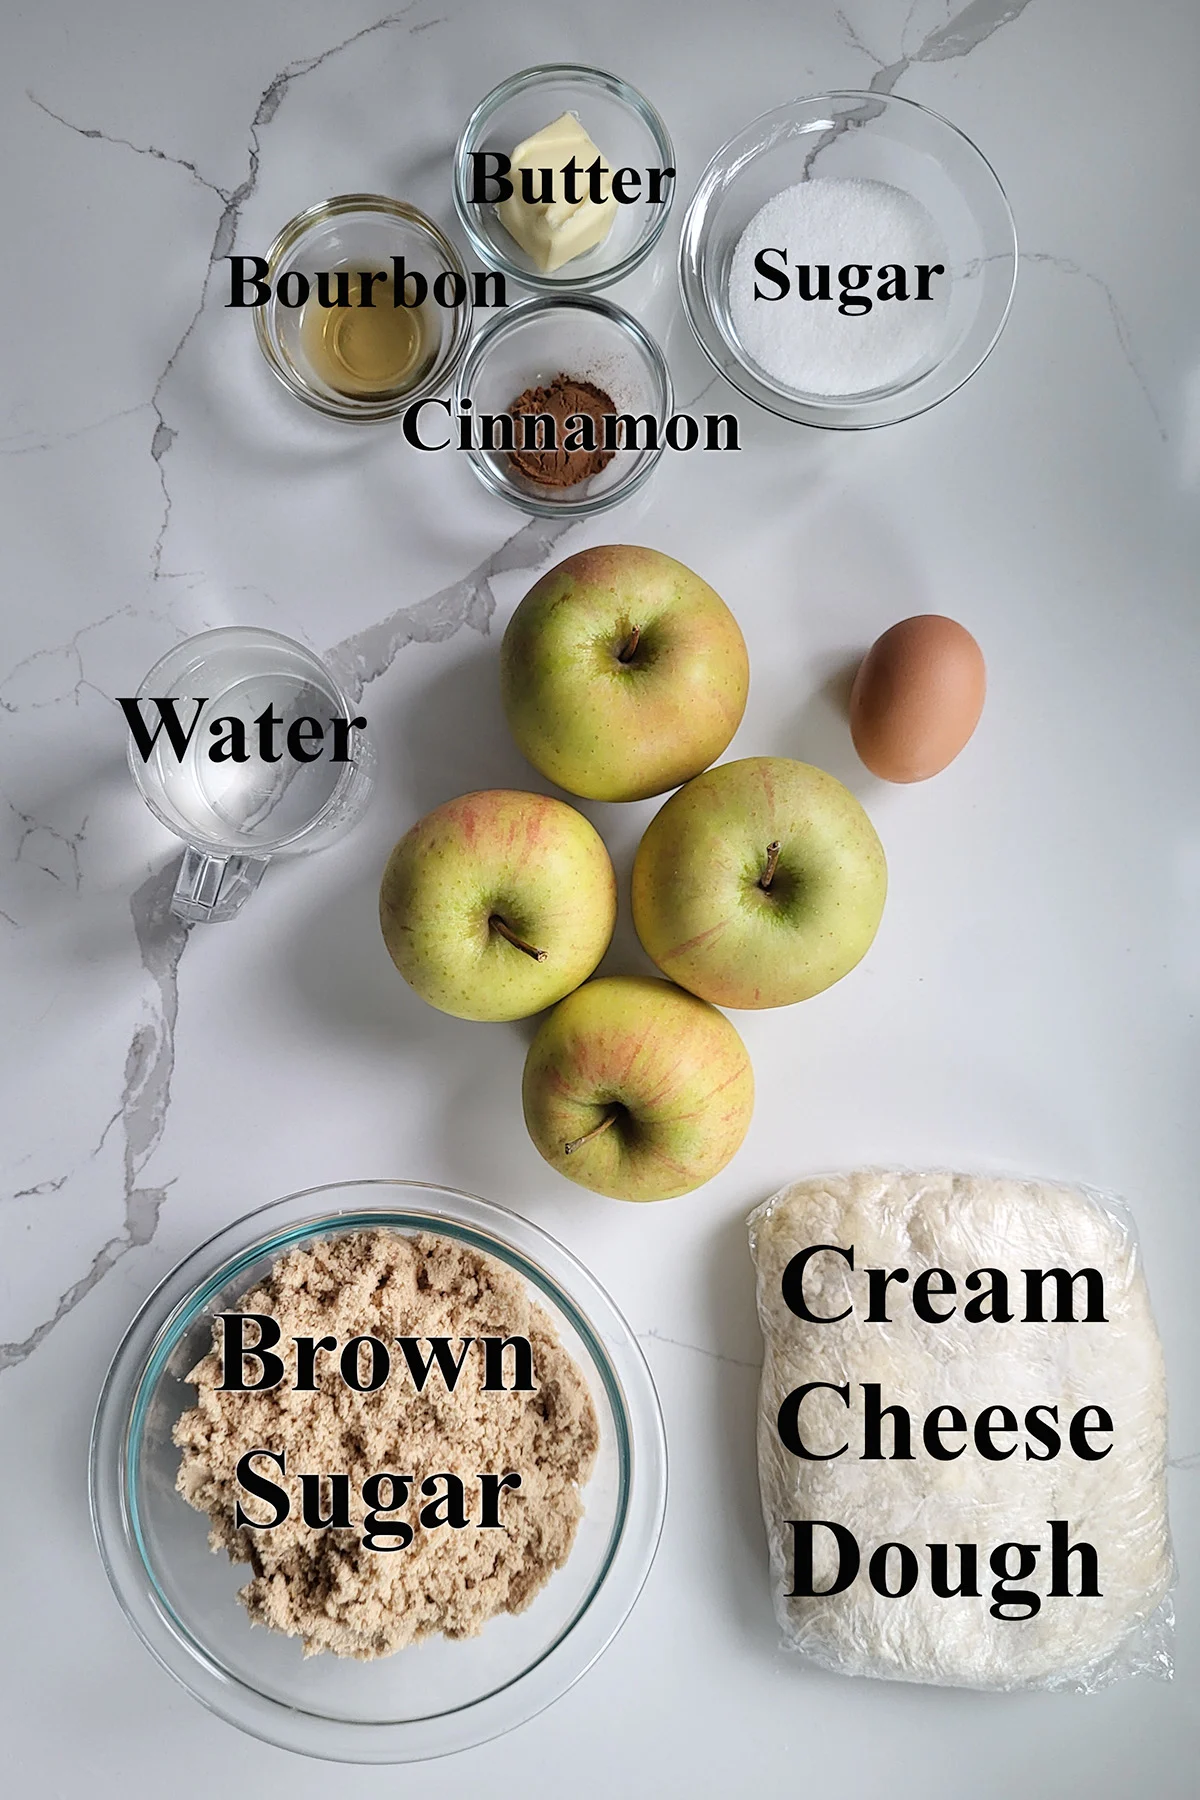 ingredients for apple dumplings in glass bowls on a white surface.